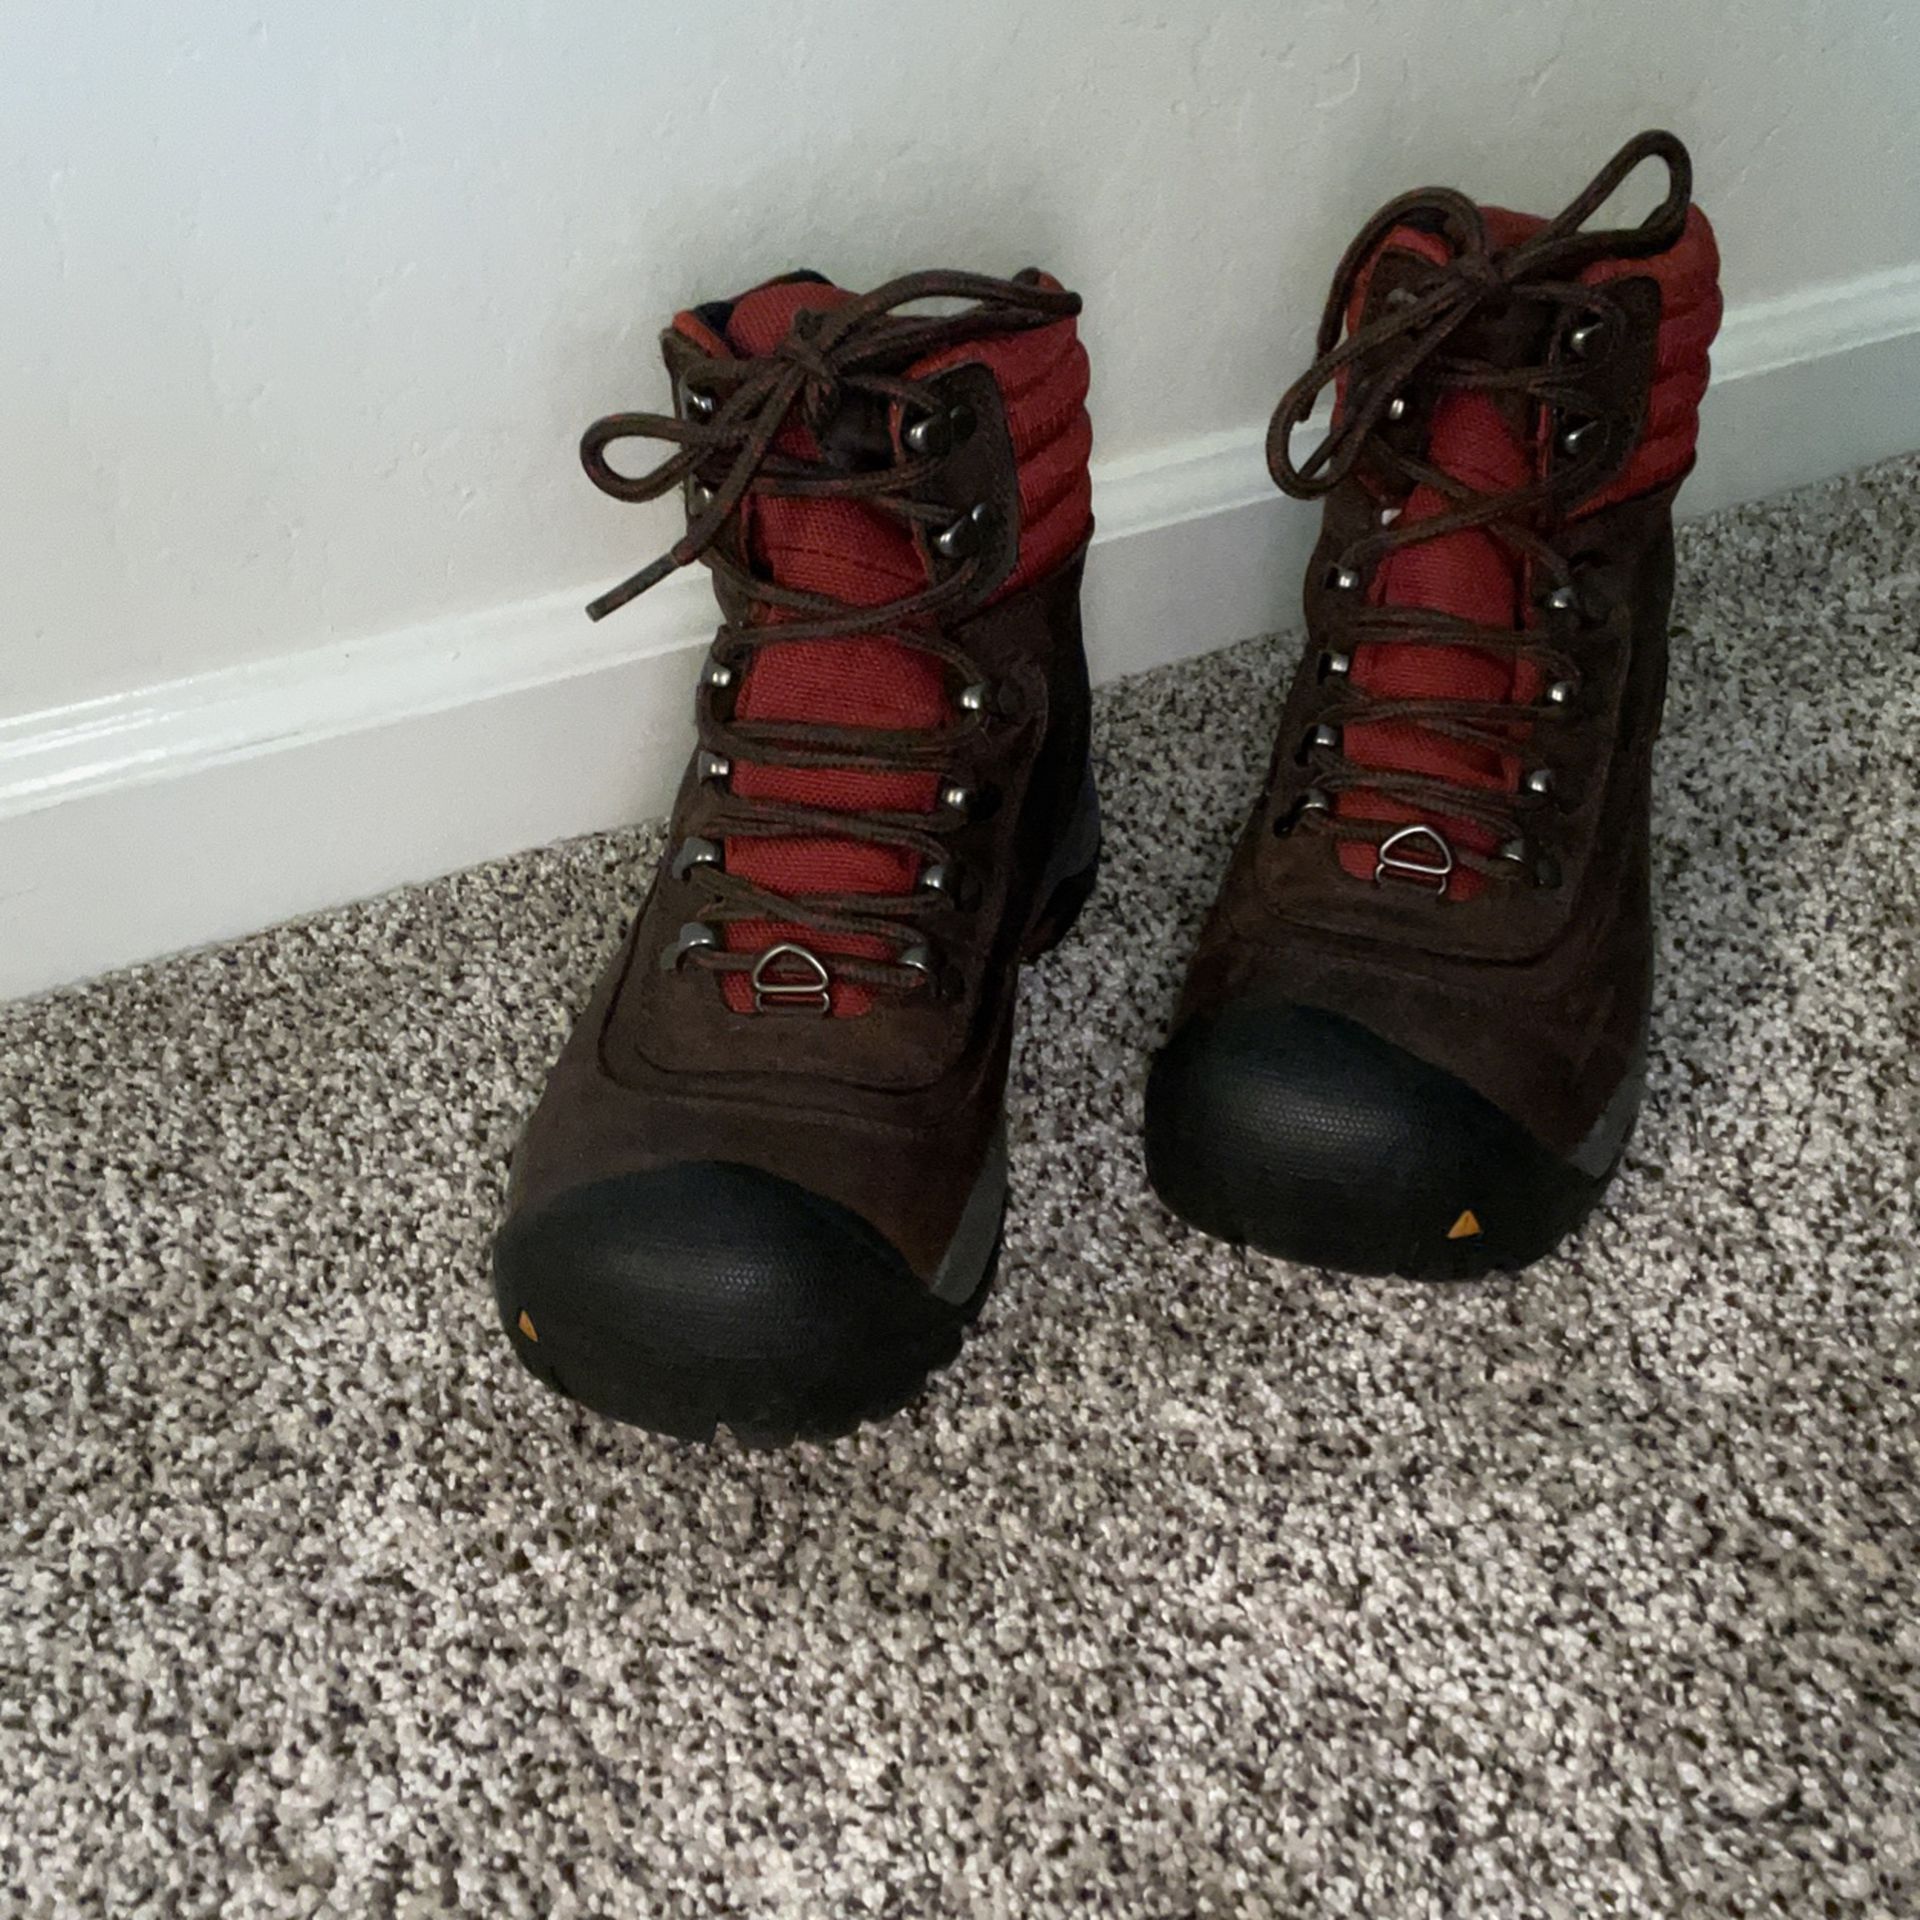 Keen Size 8 Hiking Boots